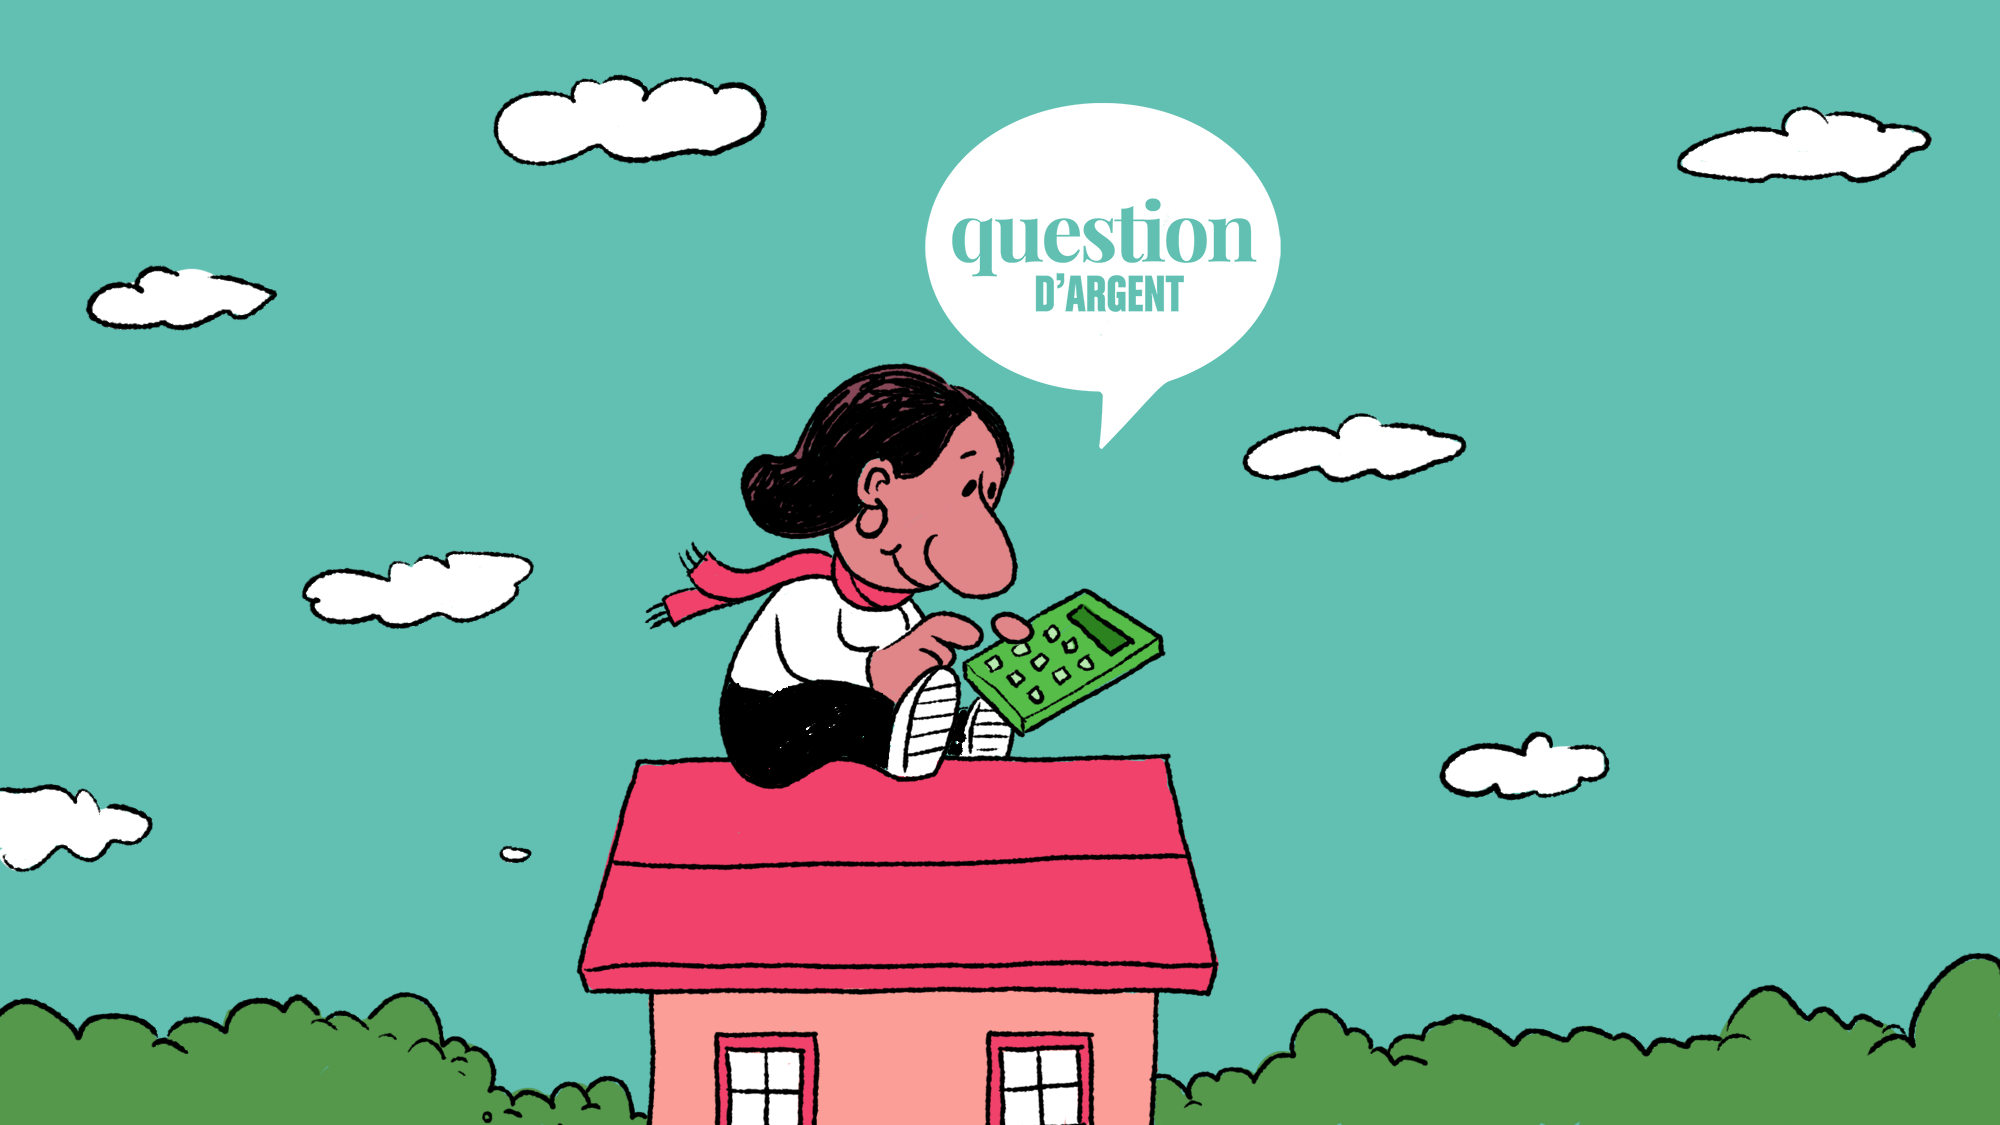 Illustration of a girl with a calculator sitting on top of house, with ask moneytalk french logo